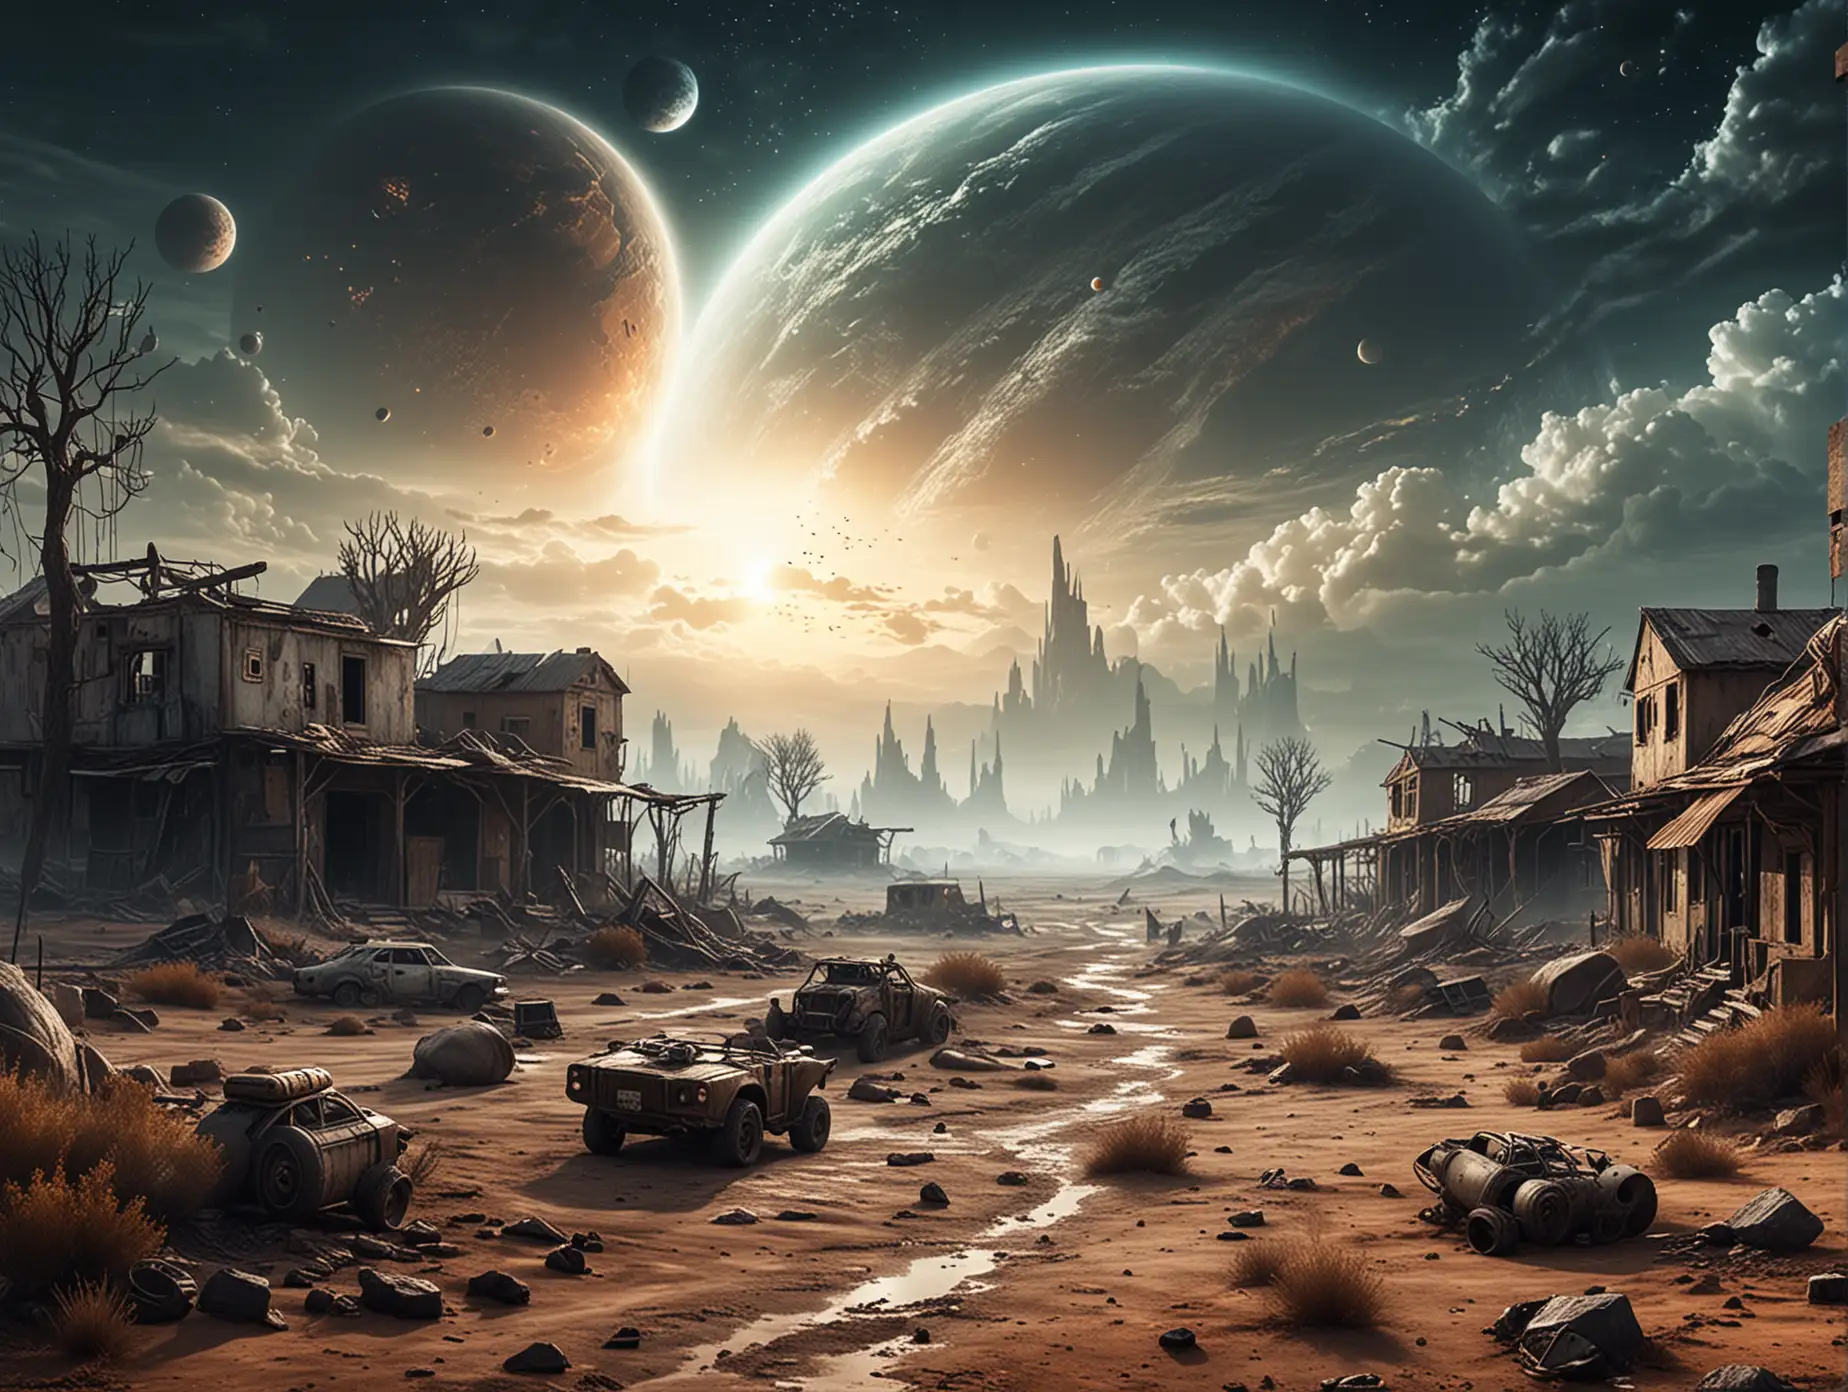 Post Apocalyptic Village in Another Universe with Three Alien Planets